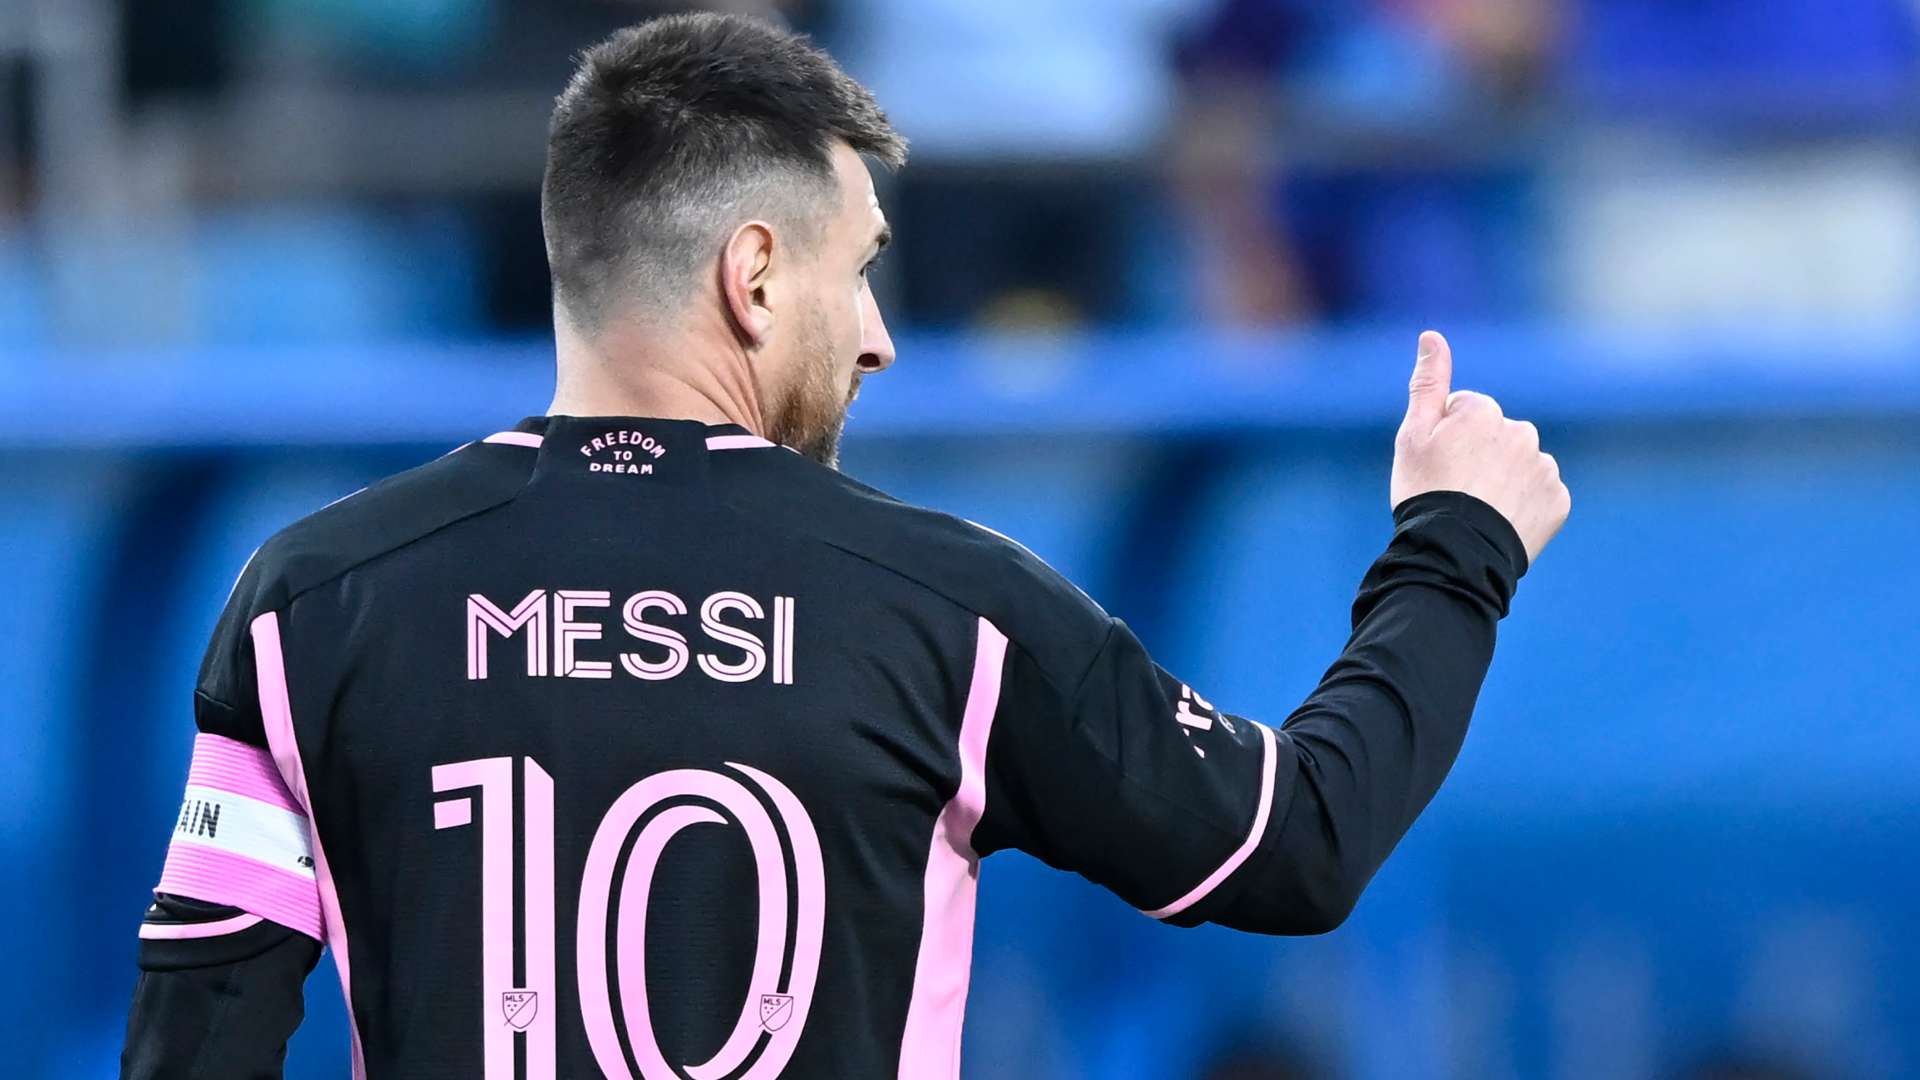 Get Your Hair A Little Messi: Top 10 Most Iconic Hairstyles Of Lionel Messi